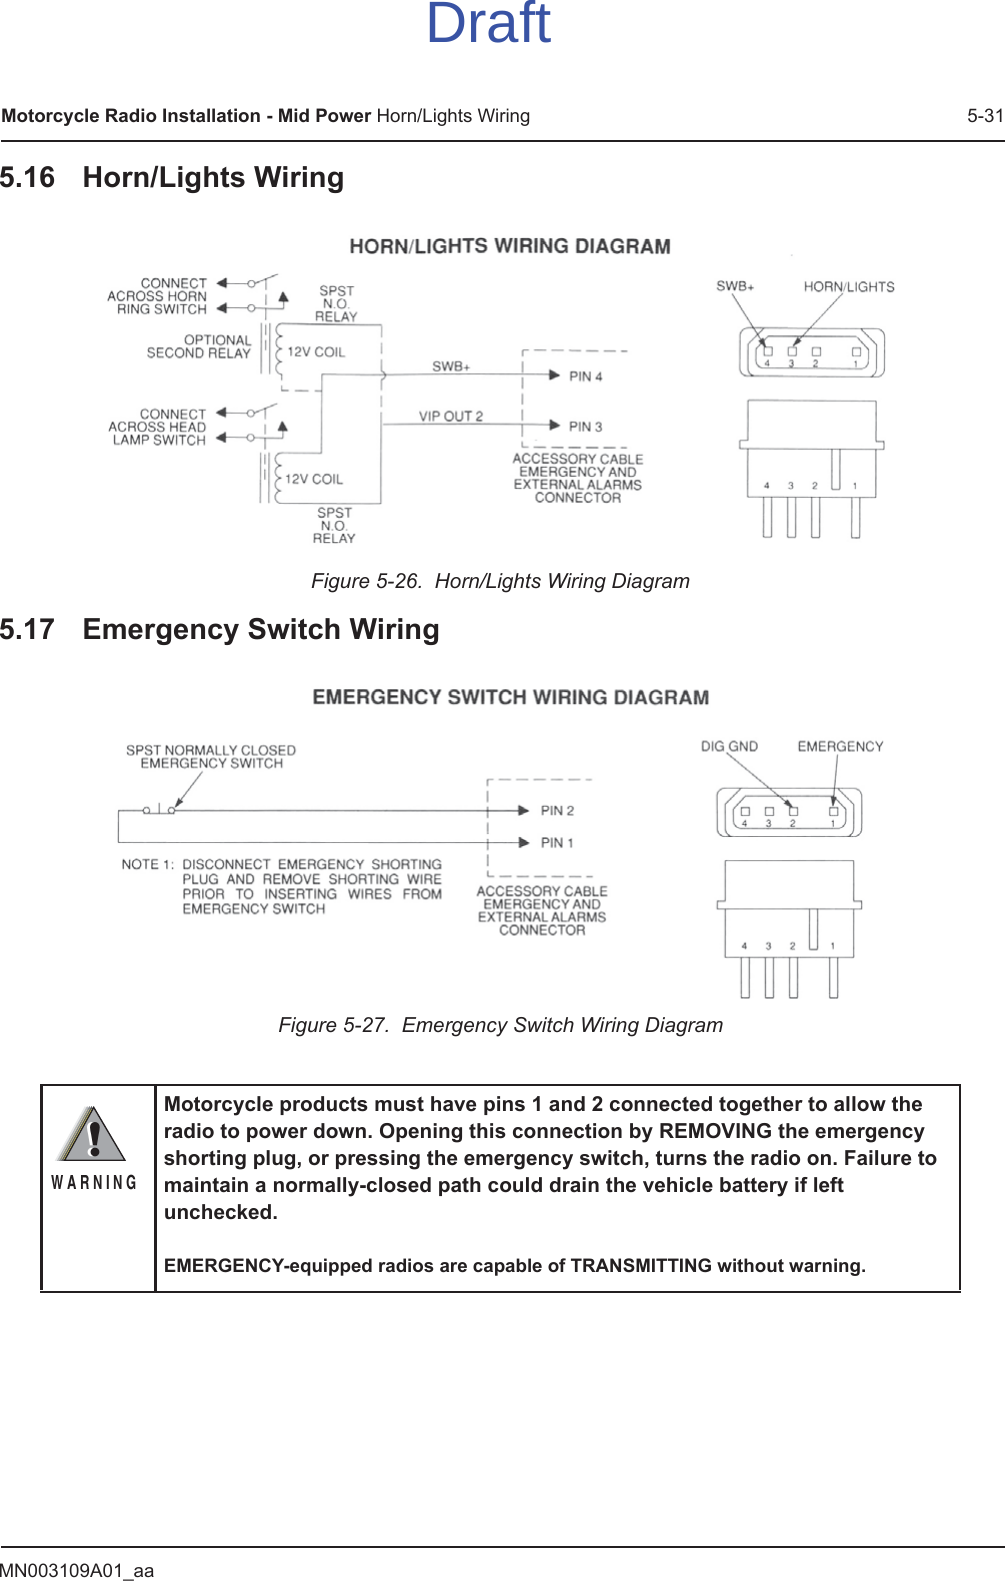 MN003109A01_aaMotorcycle Radio Installation - Mid Power Horn/Lights Wiring 5-315.16 Horn/Lights WiringFigure 5-26.  Horn/Lights Wiring Diagram5.17 Emergency Switch WiringFigure 5-27.  Emergency Switch Wiring DiagramMotorcycle products must have pins 1 and 2 connected together to allow the radio to power down. Opening this connection by REMOVING the emergency shorting plug, or pressing the emergency switch, turns the radio on. Failure to maintain a normally-closed path could drain the vehicle battery if left unchecked.EMERGENCY-equipped radios are capable of TRANSMITTING without warning.!W A R N I N G!Draft